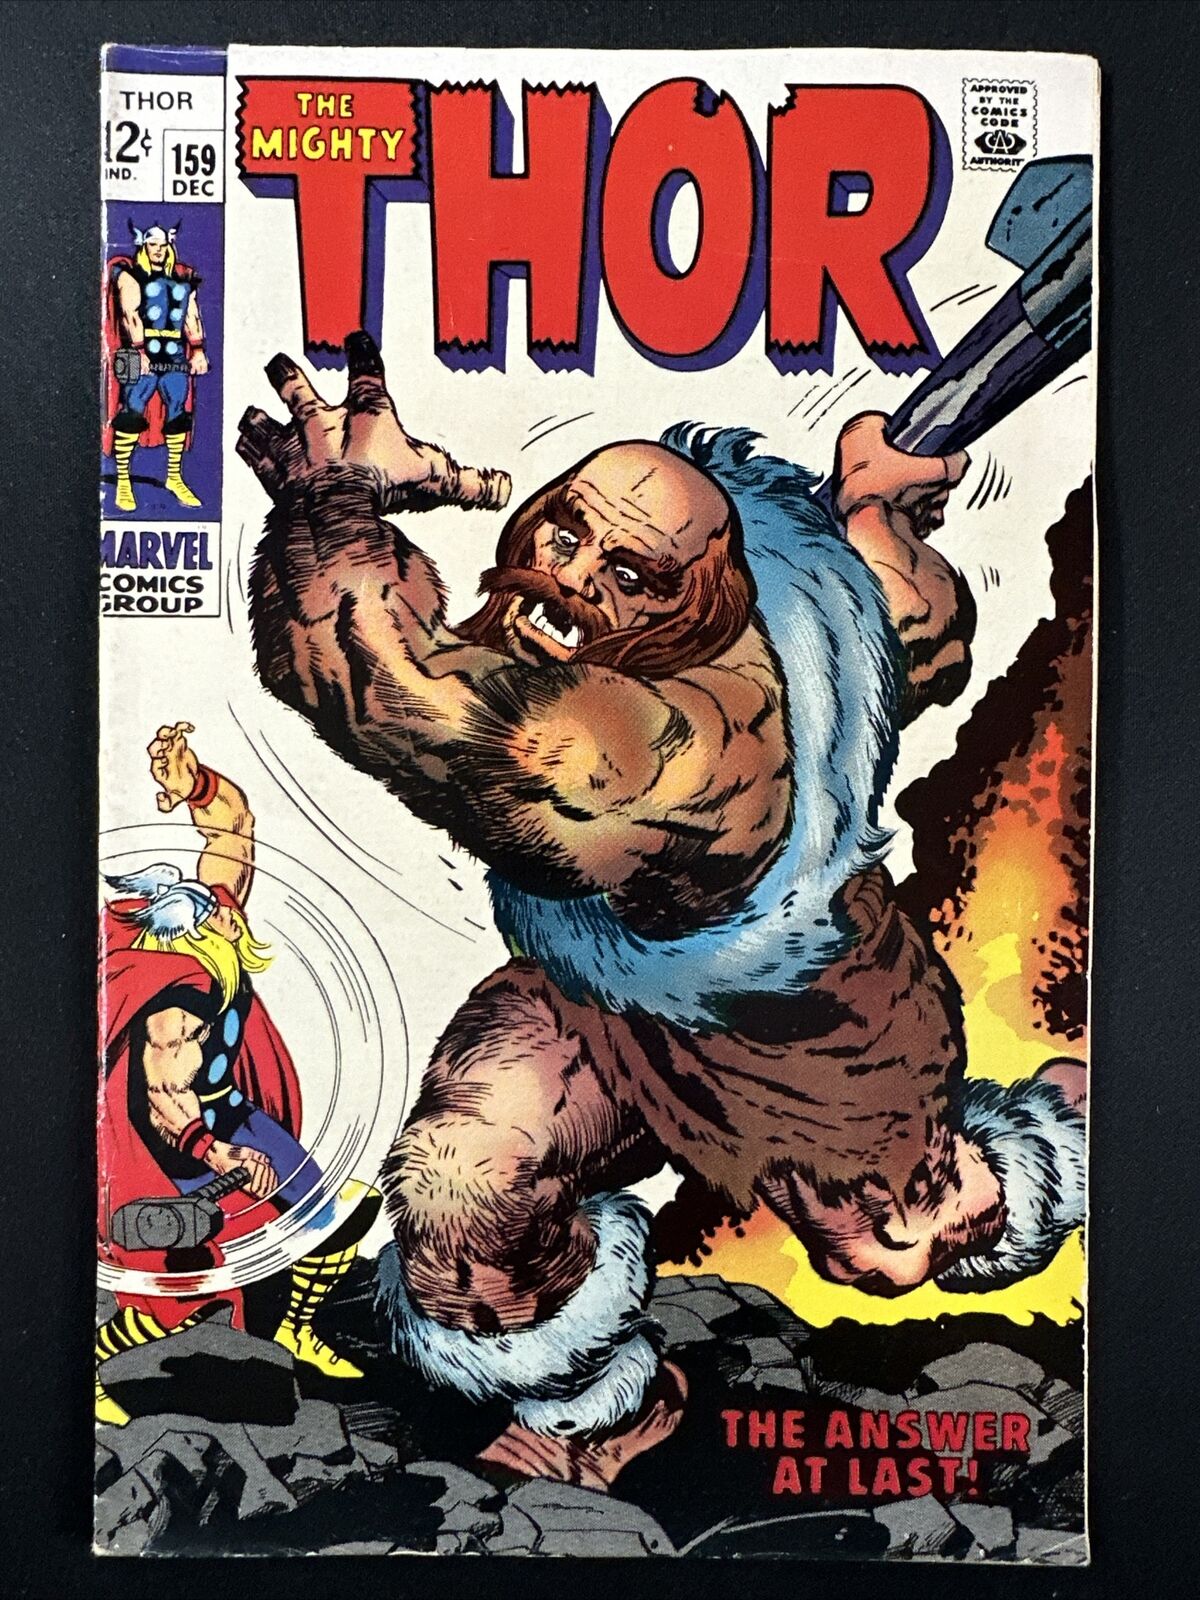 The Mighty Thor #159 Vintage Marvel Comics Silver Age 1st Print 1968 VG/Fine *A2